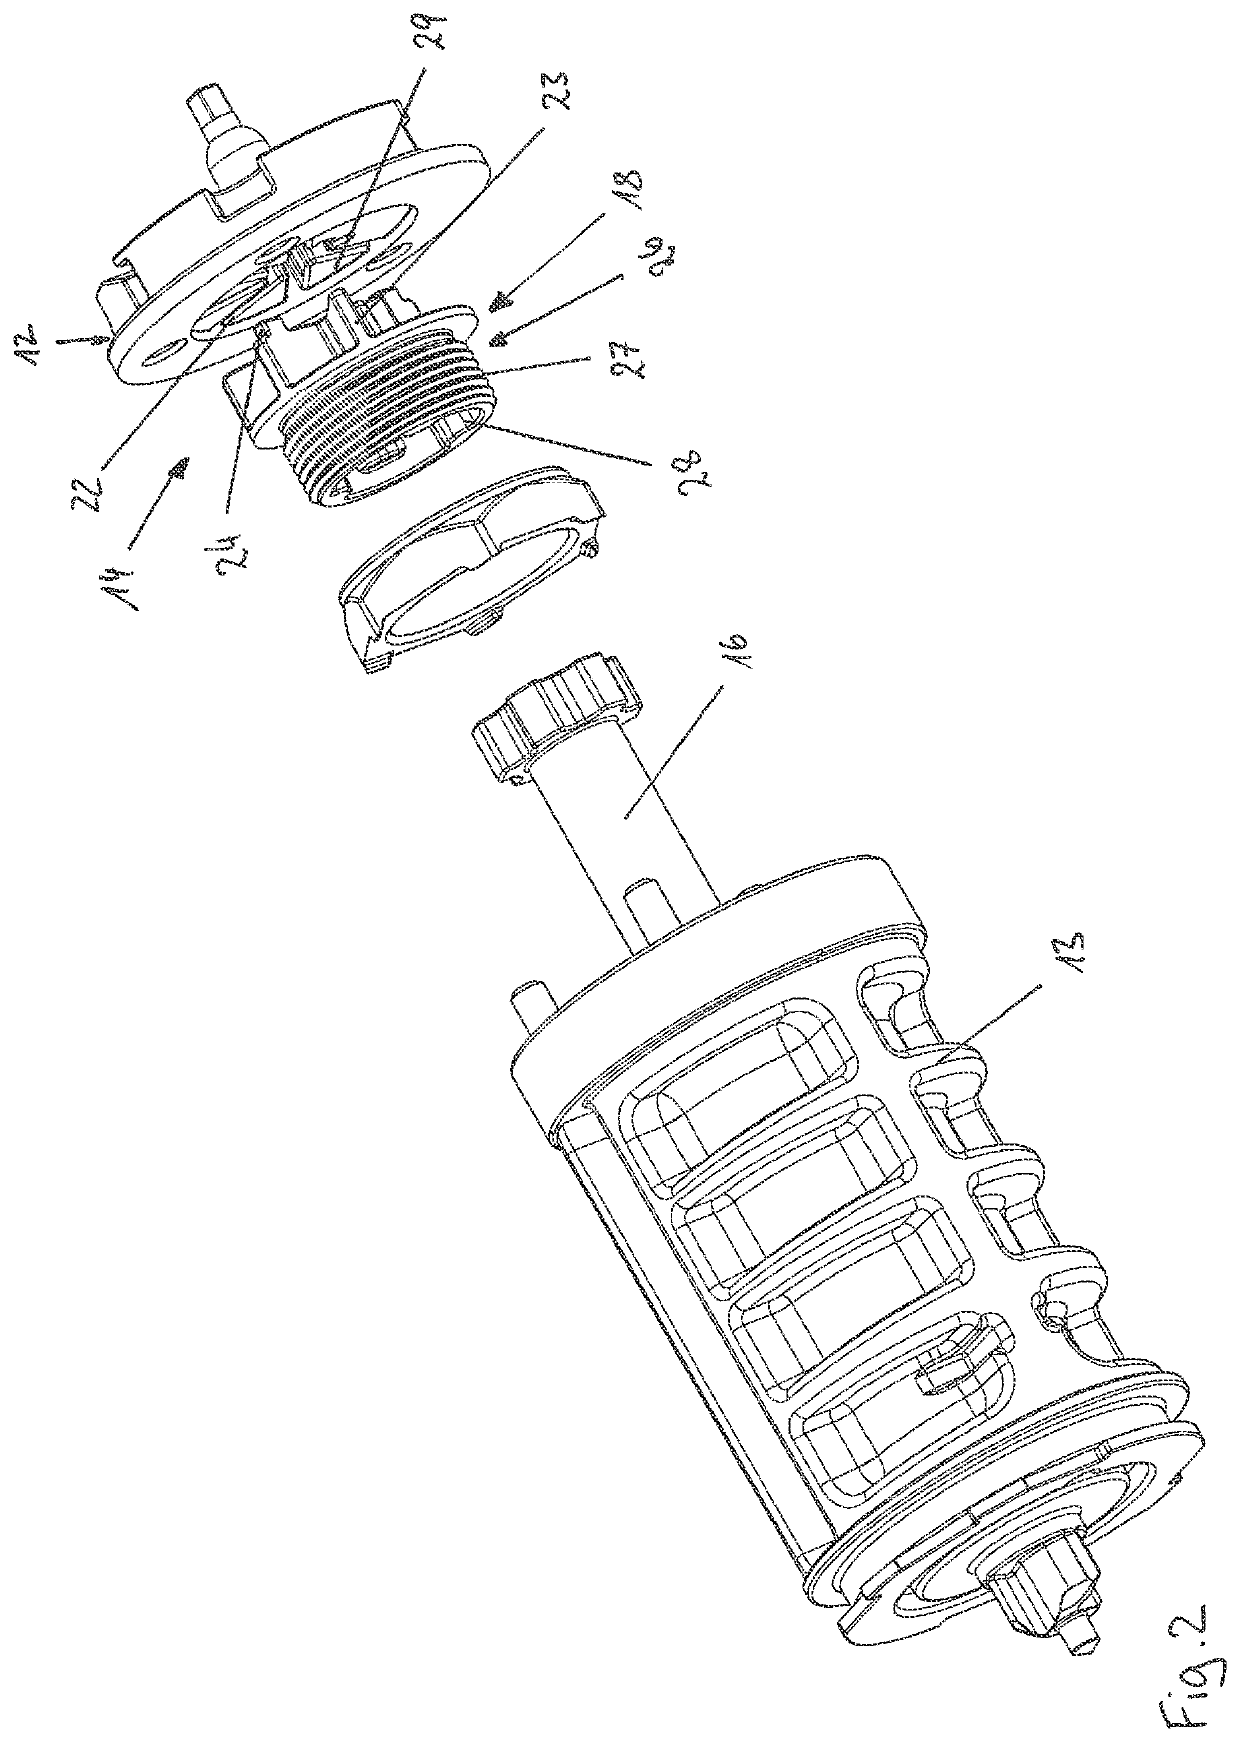 Self-locking belt retractor for a seat belt device of a motor vehicle